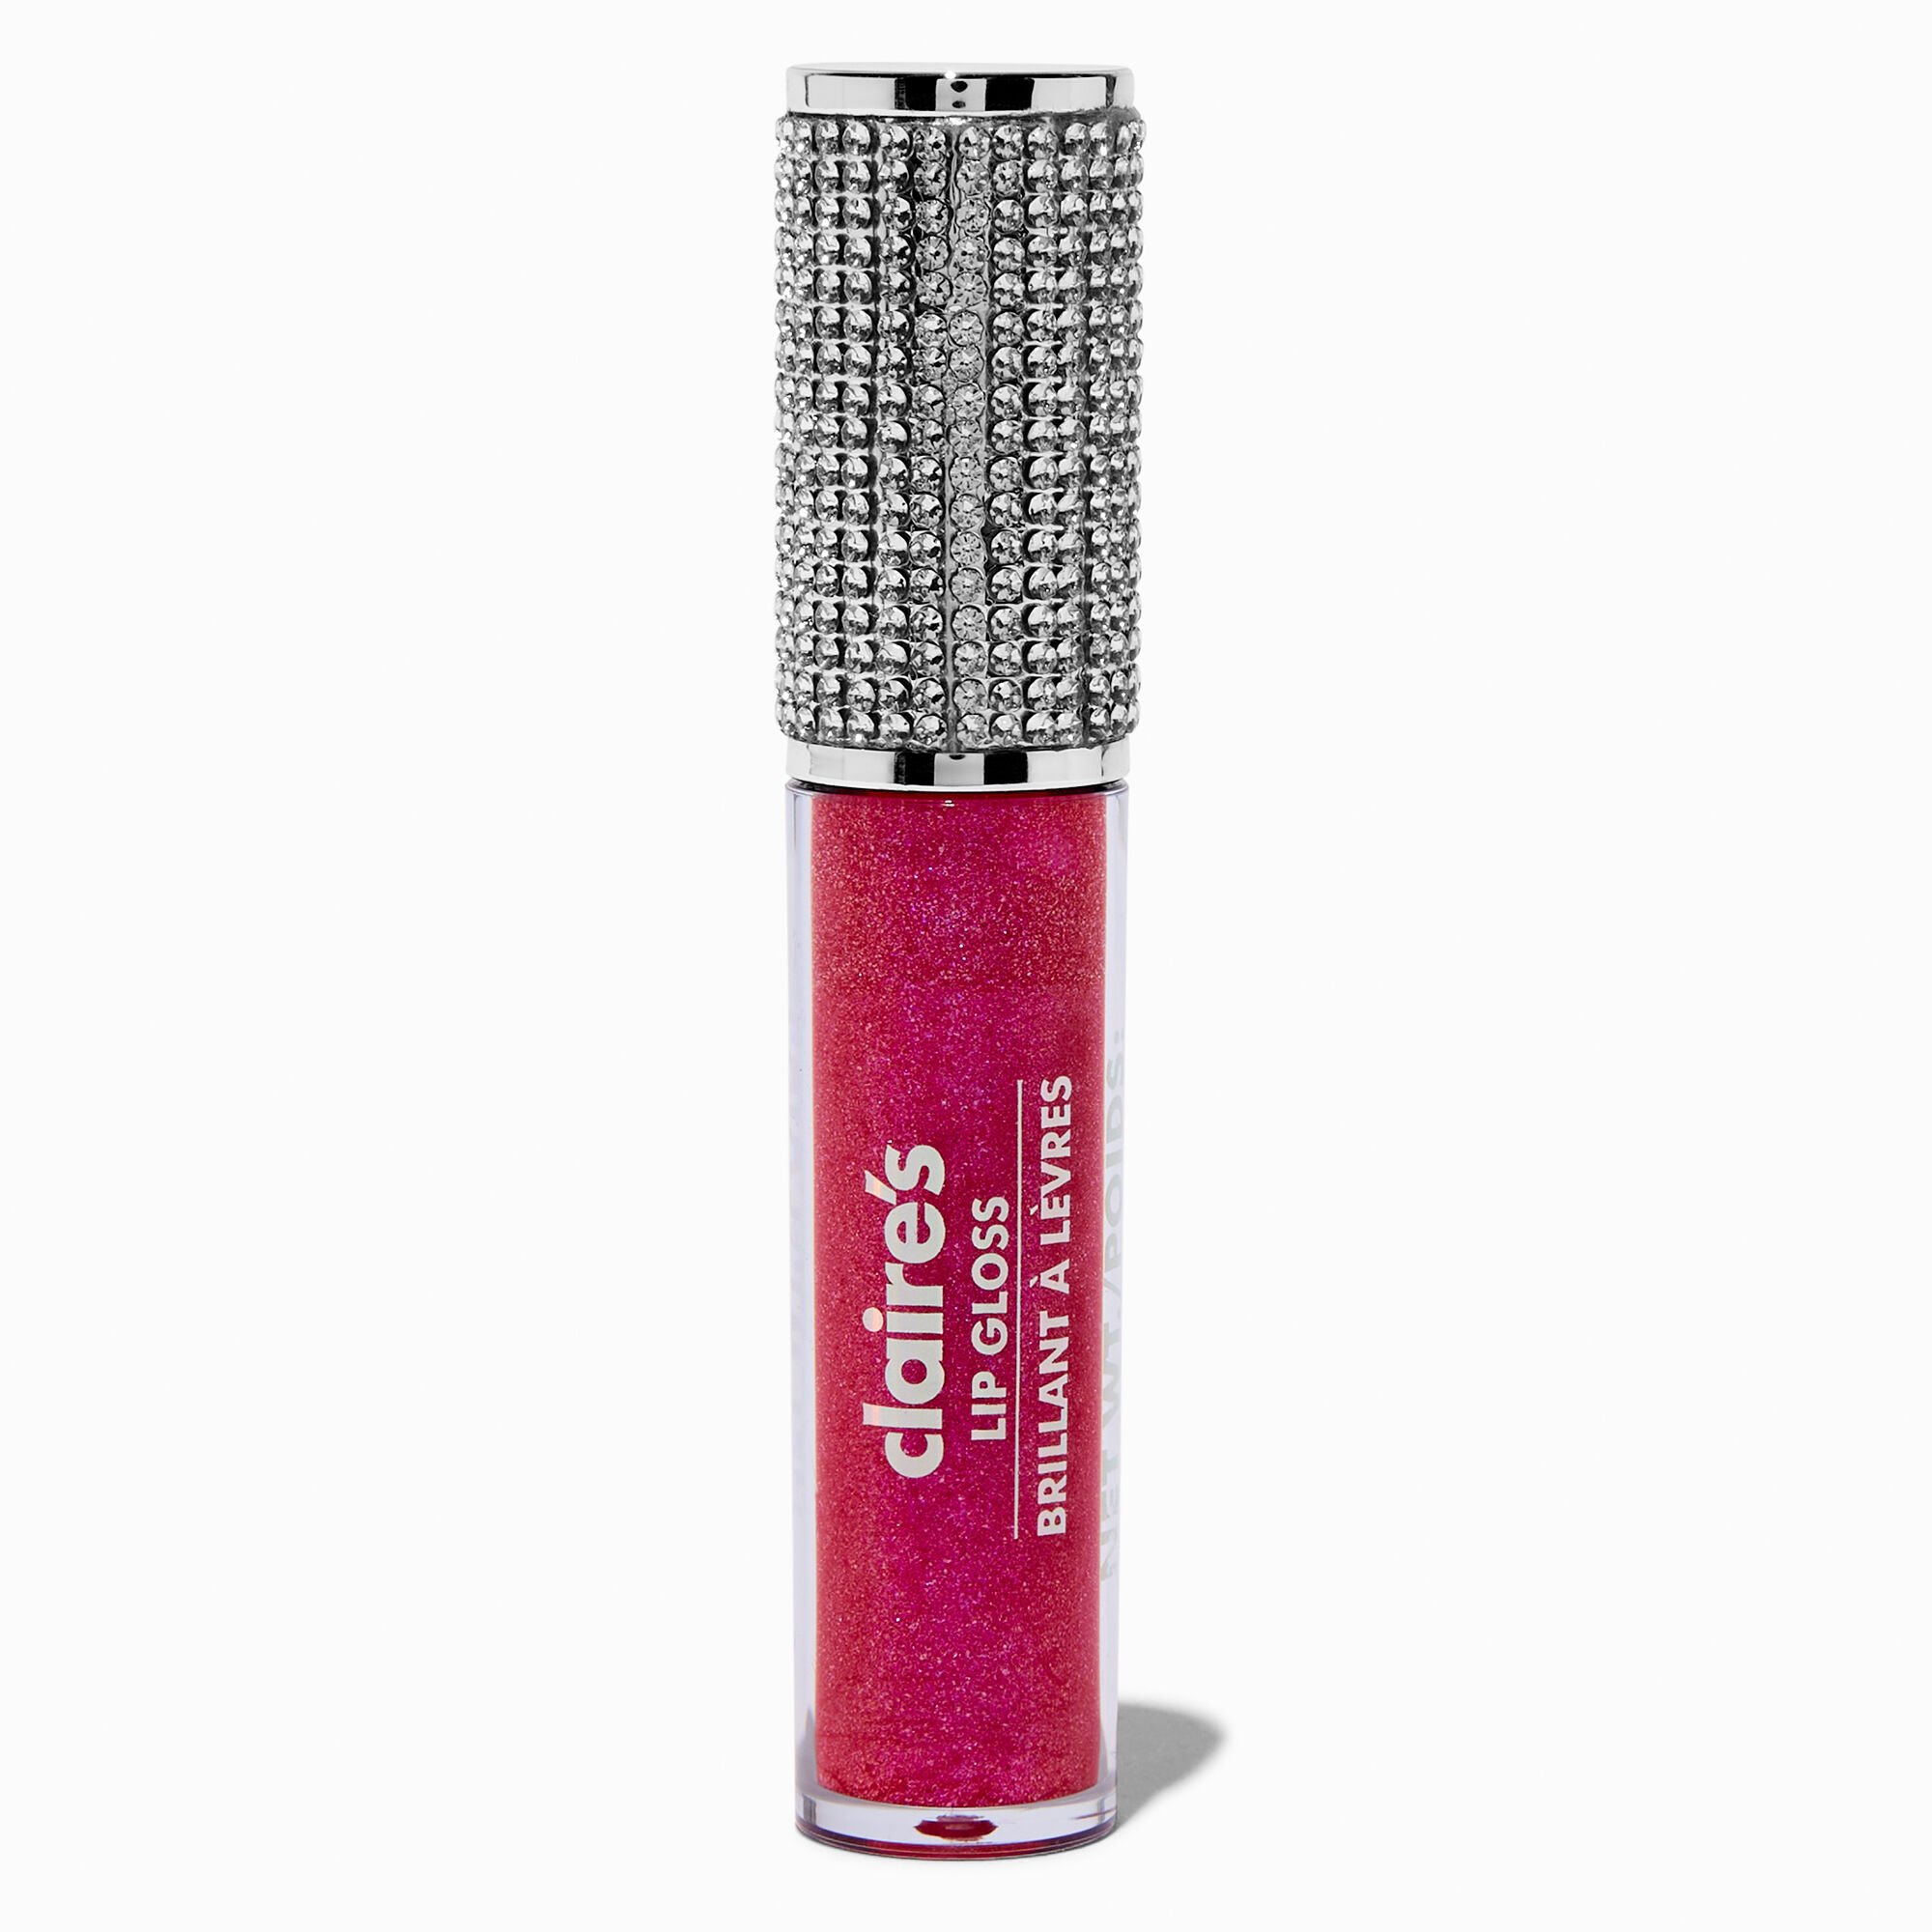 View Claires Bling Glitter Lip Gloss Wand Fuchsia information